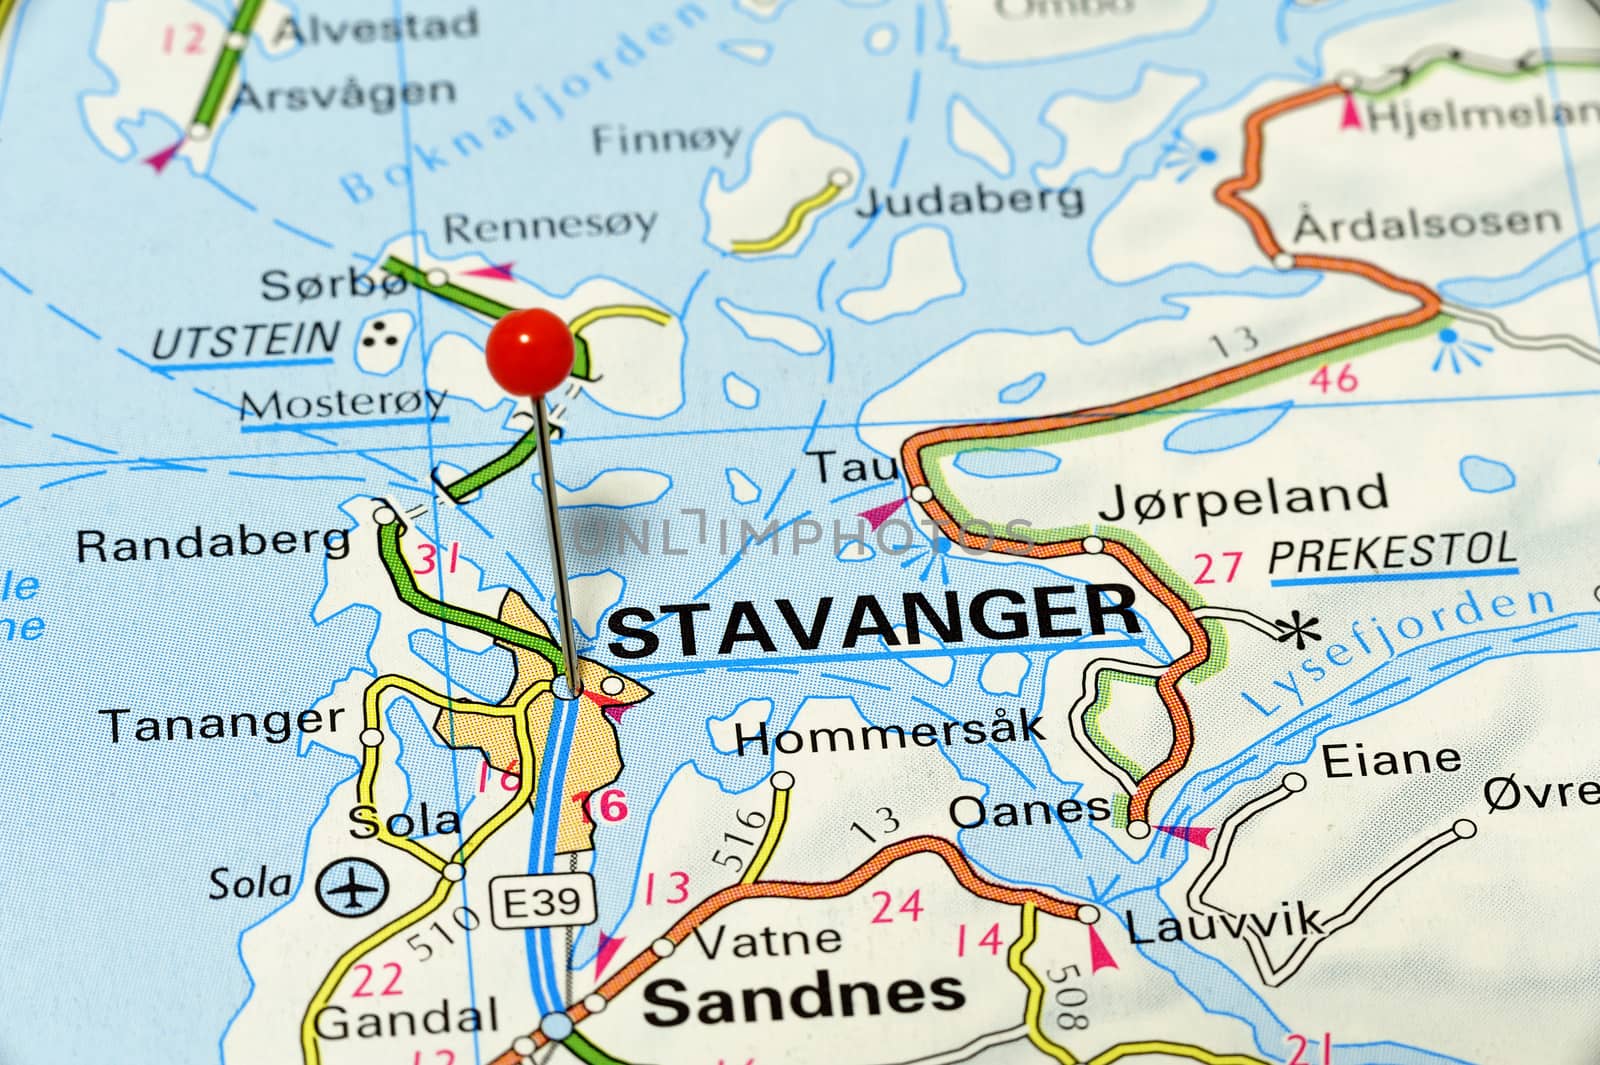 Stavanger - famous city in Norway. Red flag pin on an old map showing travel destination.